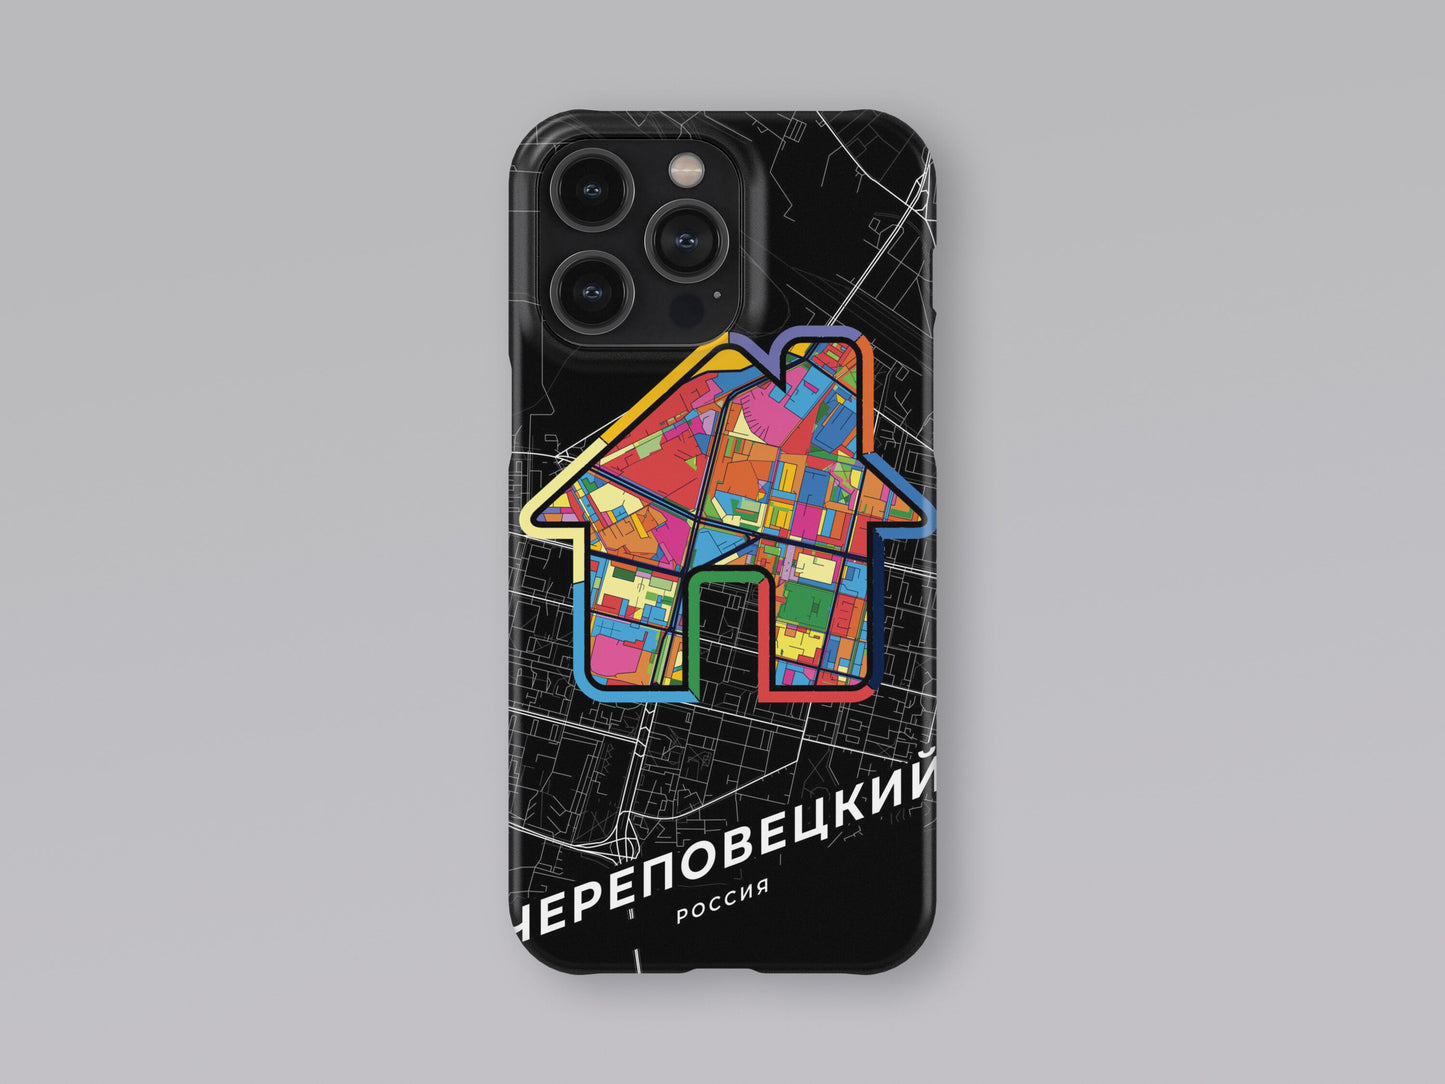 Cherepovets Russia slim phone case with colorful icon. Birthday, wedding or housewarming gift. Couple match cases. 3